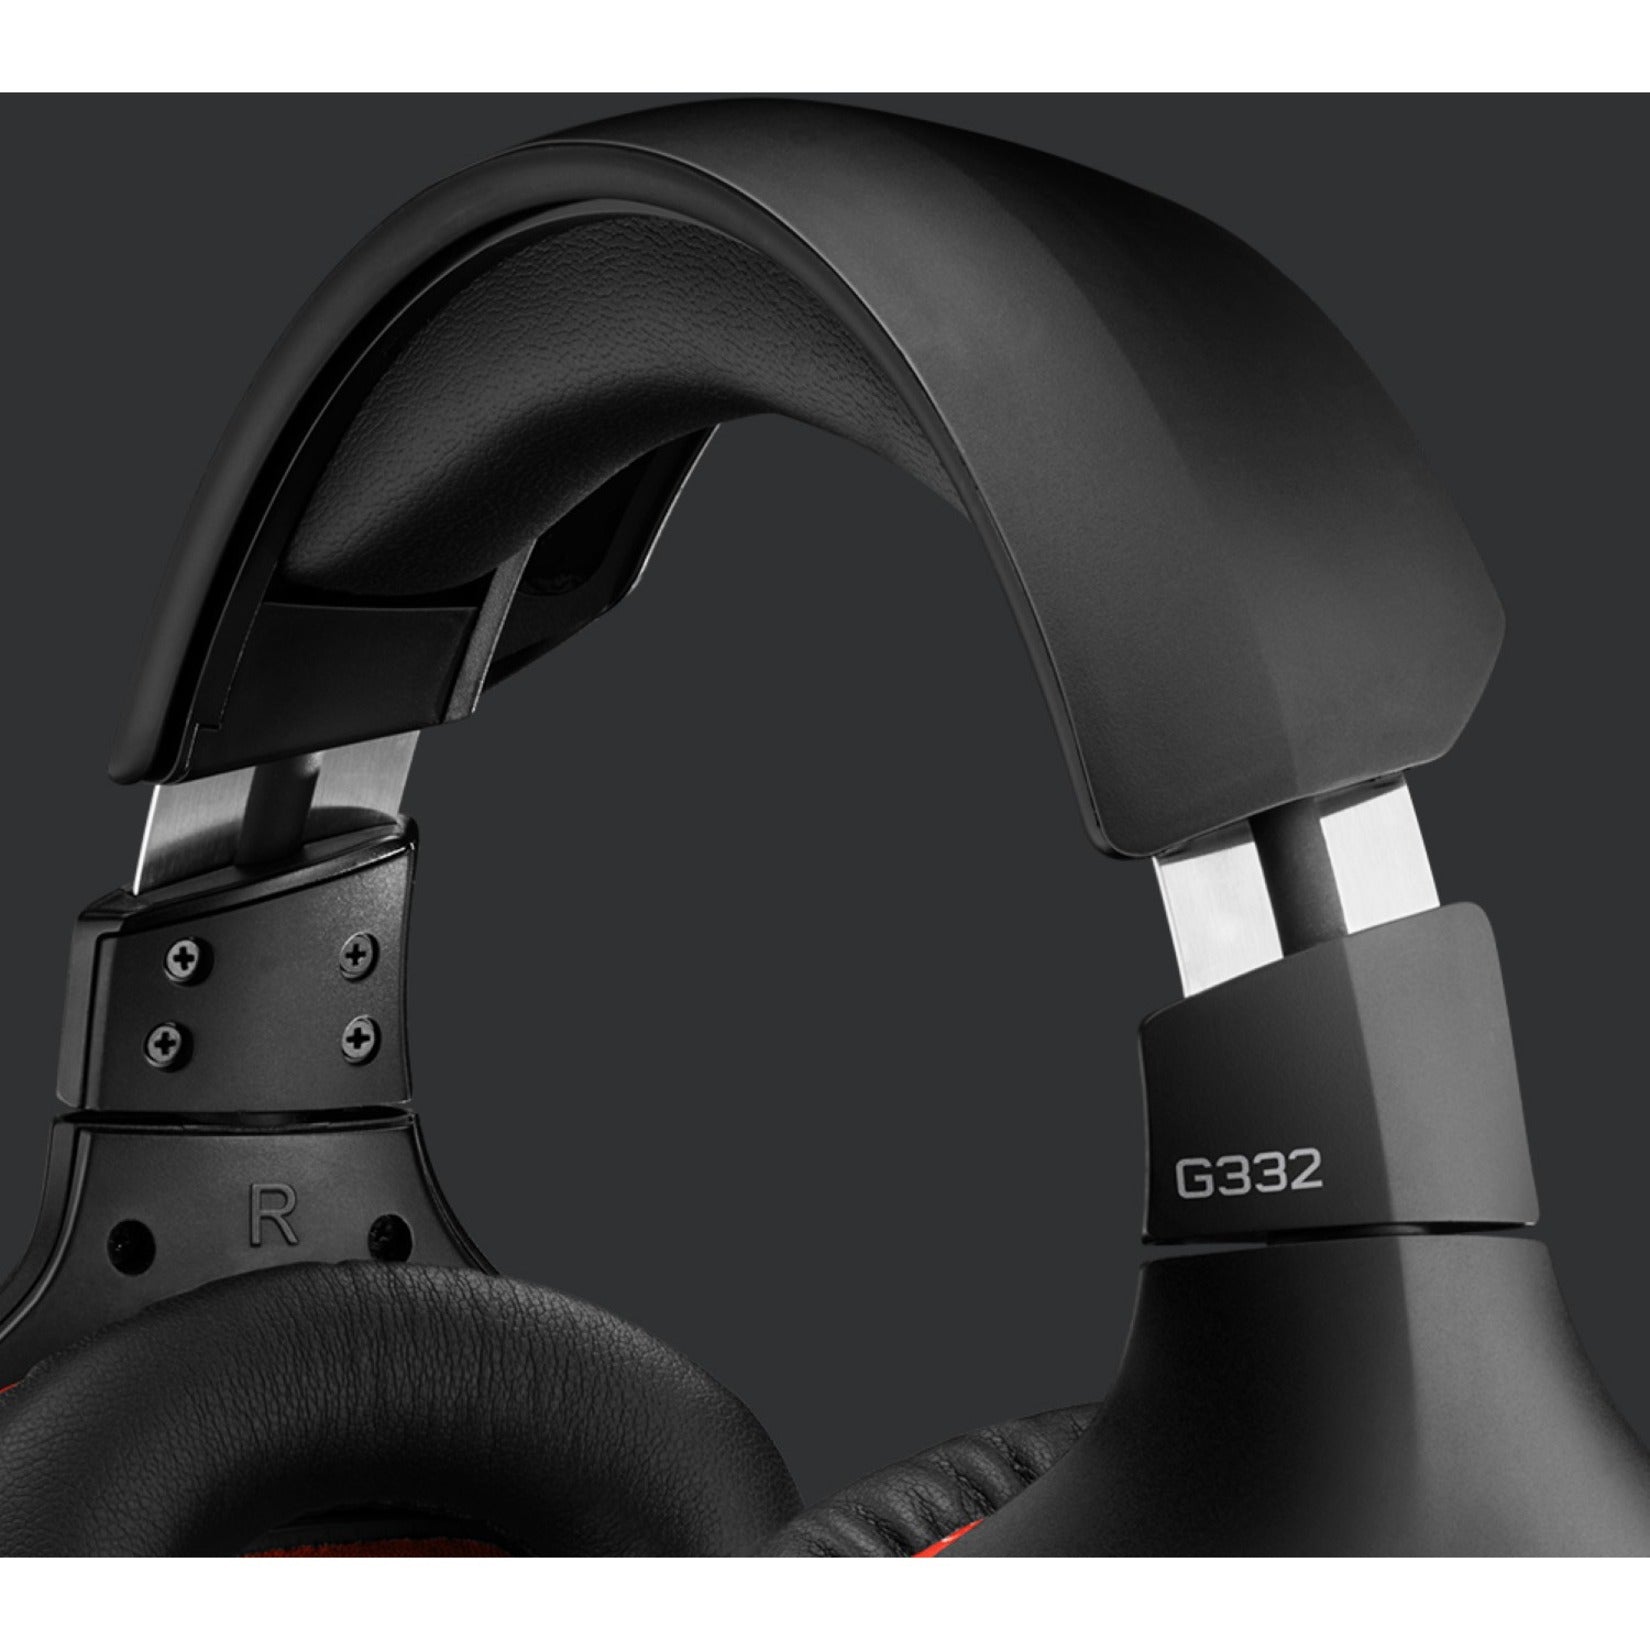 Logitech G332 Stereo Gaming Headset - Immersive Gaming Experience [Discontinued]